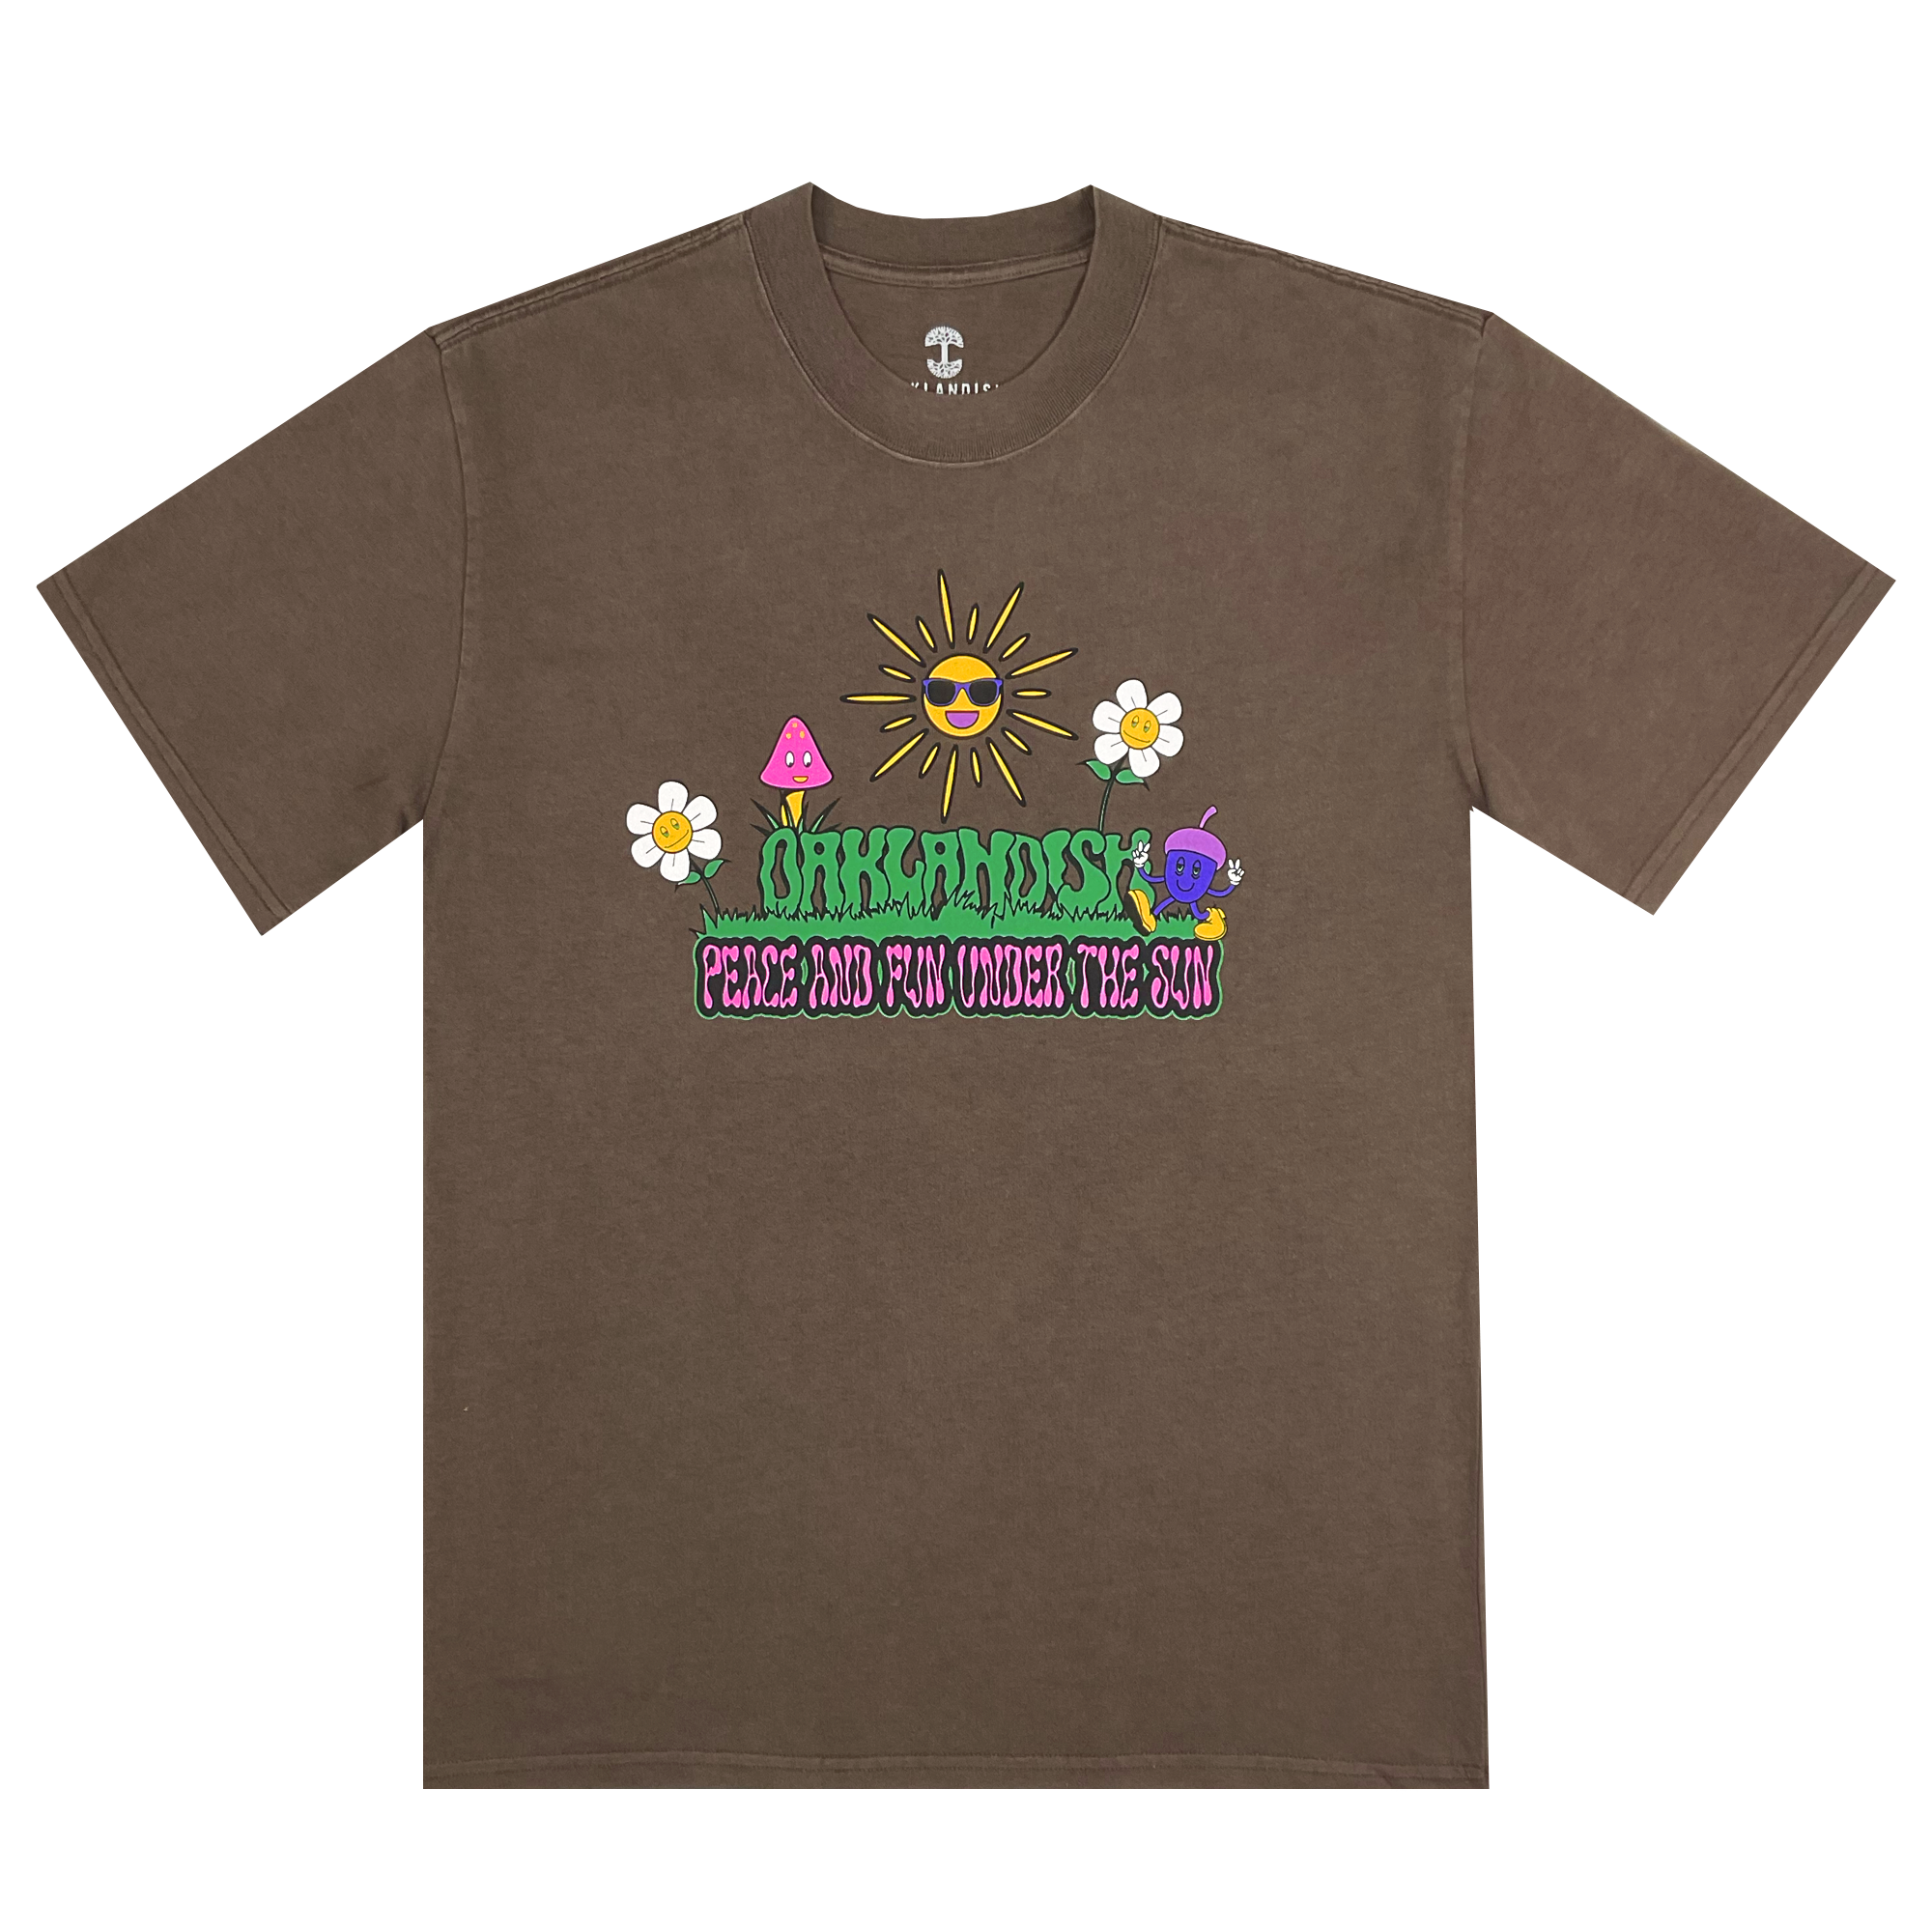 Front view of Faded Brown cotton tee with Under the Sun design.